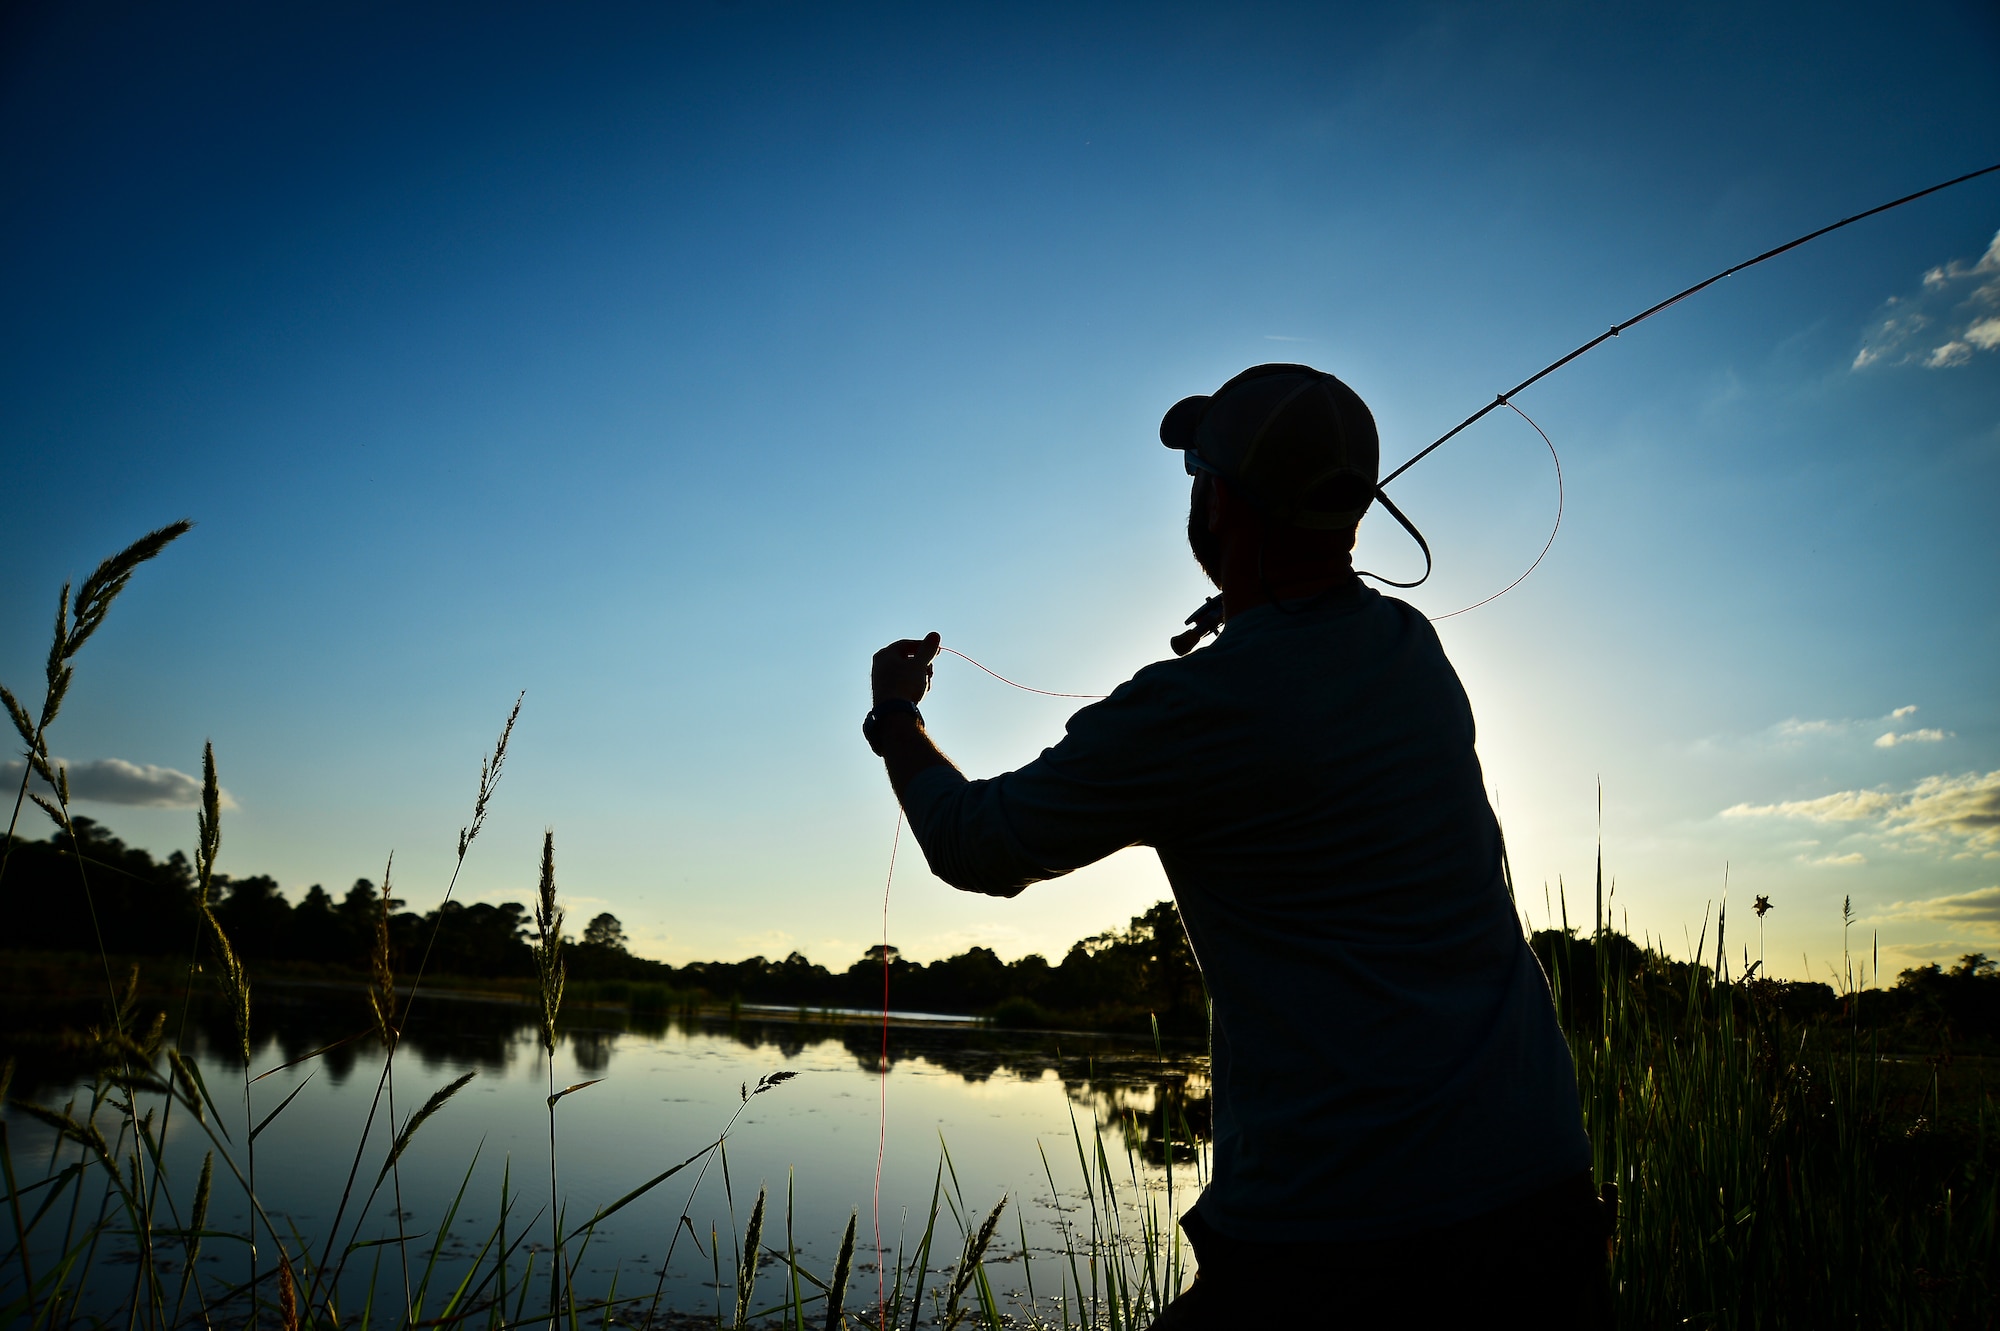 James Custer, a Project Healing Waters Fly Fishing participant, practices newly learned casting techniques at MacDill Air Force Base, Fla., April 17, 2014.  The group’s most recent outing took place at MacDill Air Force Base’s Lewis Lake, where volunteers aided participants as they honed their new-found casting skills and dipped their freshly tied flies. (U.S. Air Force photo by Staff Sgt. Brandon Shapiro/Released)